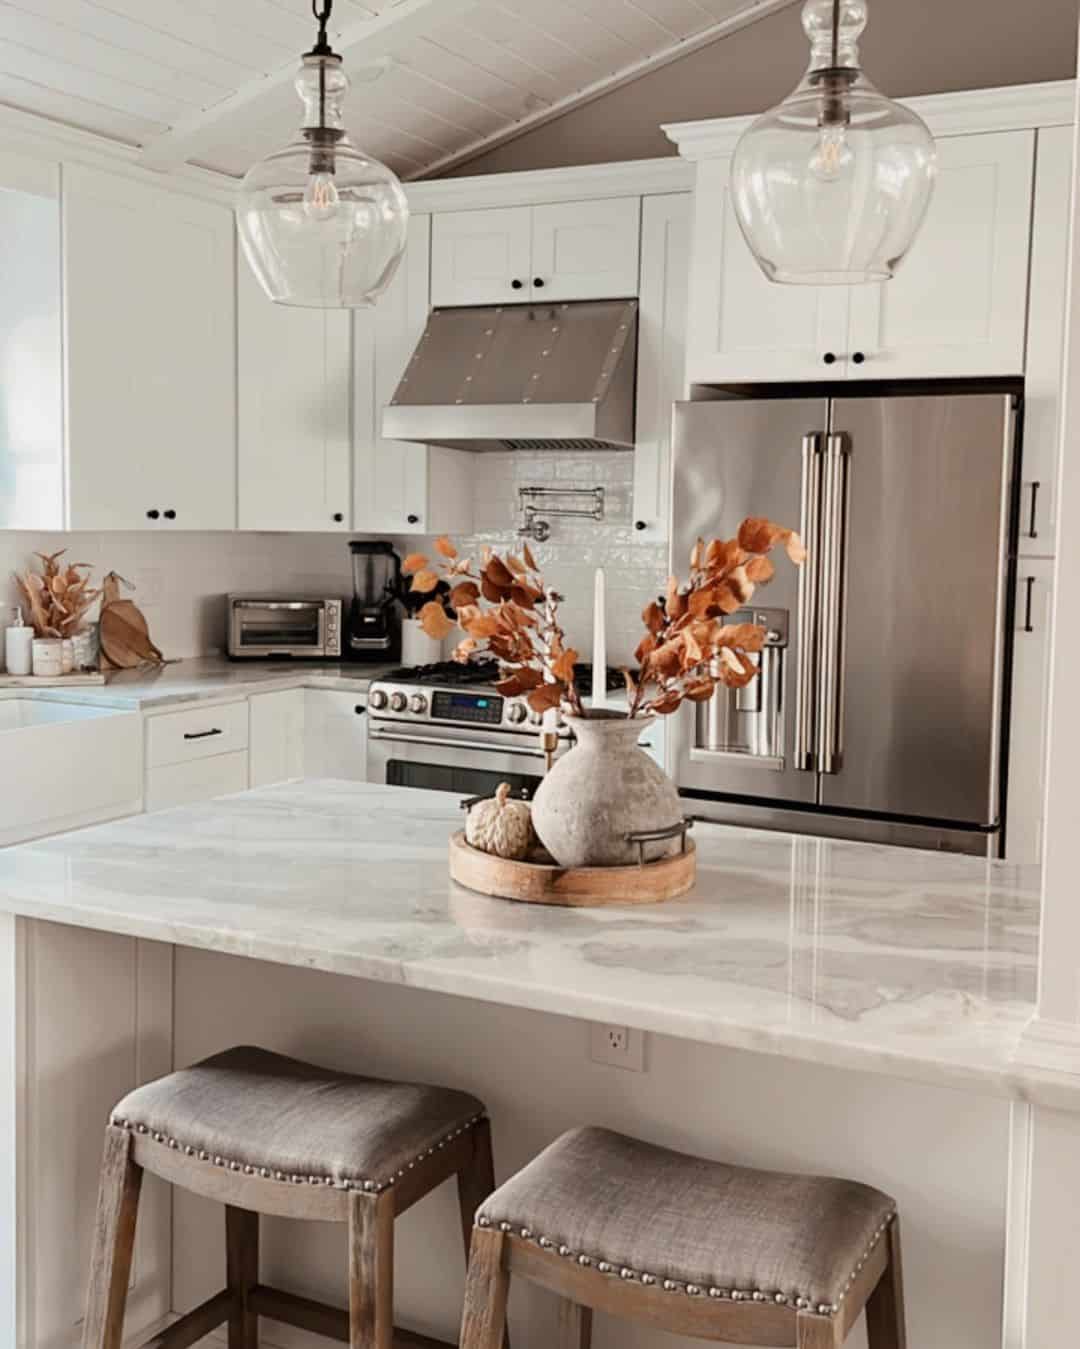 Captivating Contrast in a Kitchen with White and Gray Marble Countertops